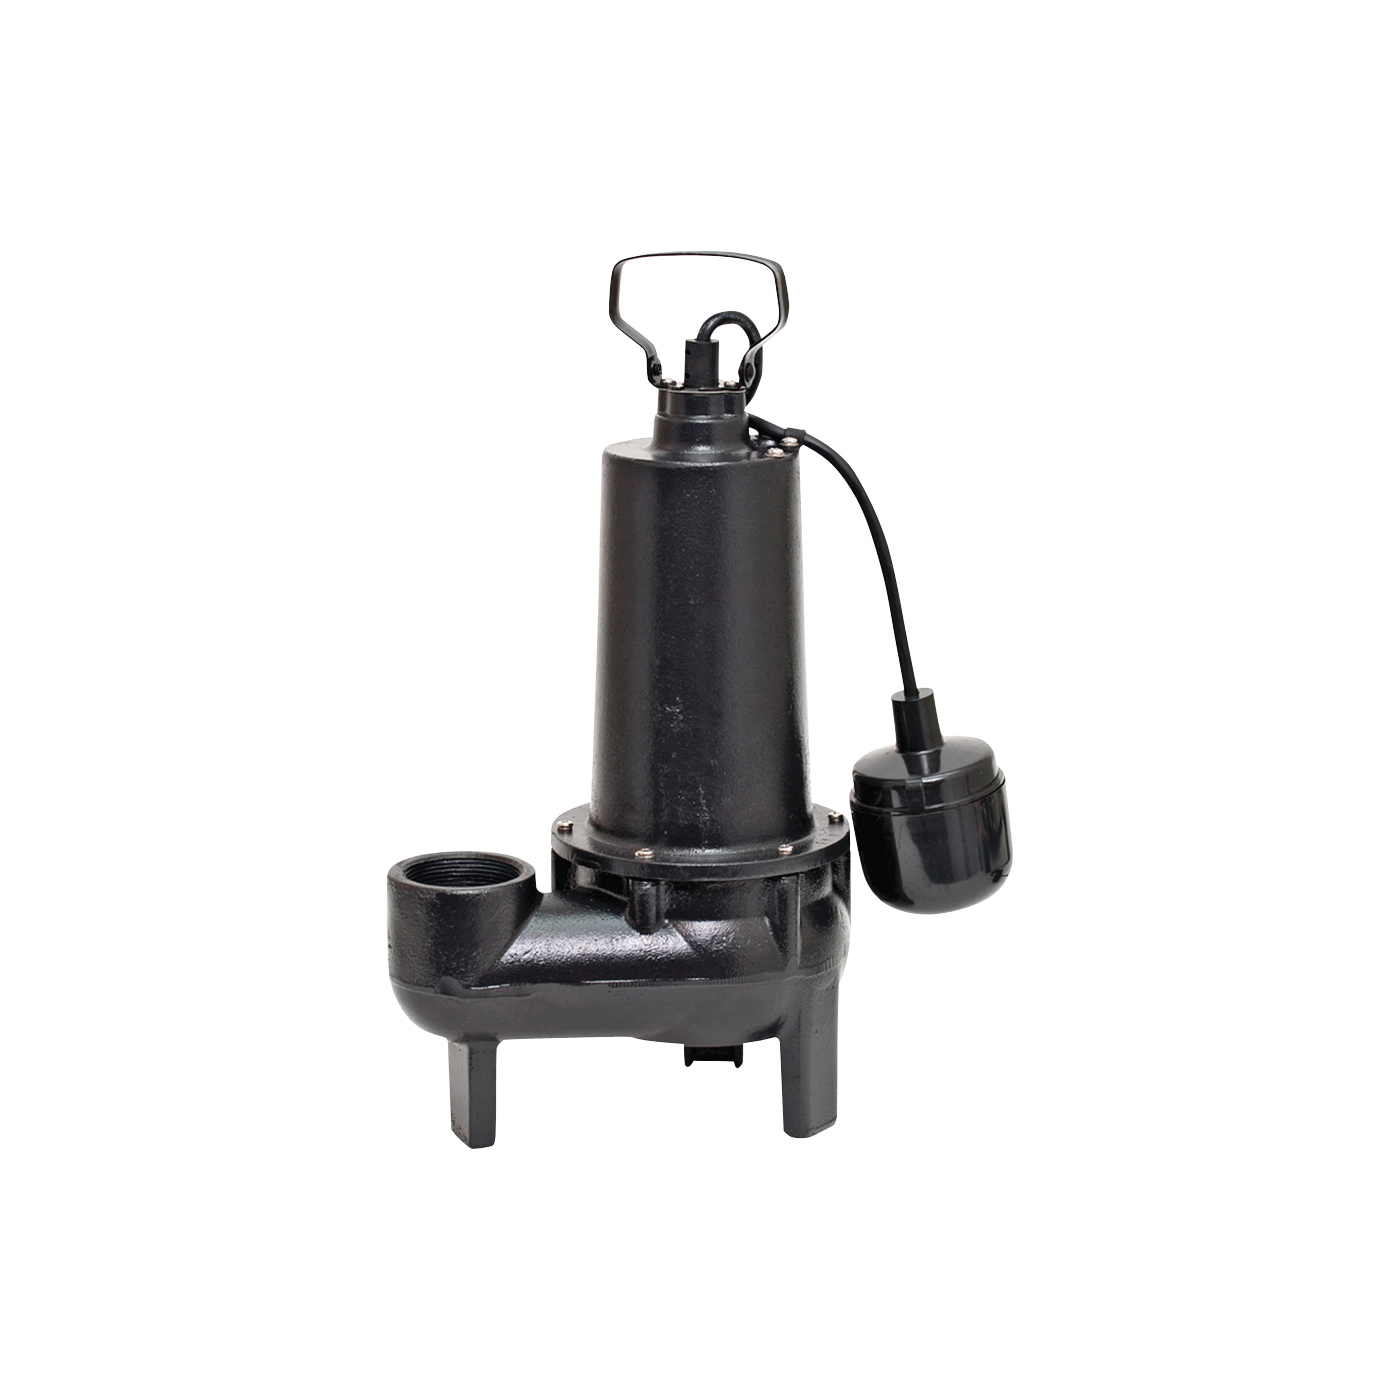 Superior Pump 93501 Sewage Pump, 1-Phase, 7.6 A, 120 V, 0.5 hp, 2 in Outlet, 25 ft Max Head, 80 gpm, Iron - 1